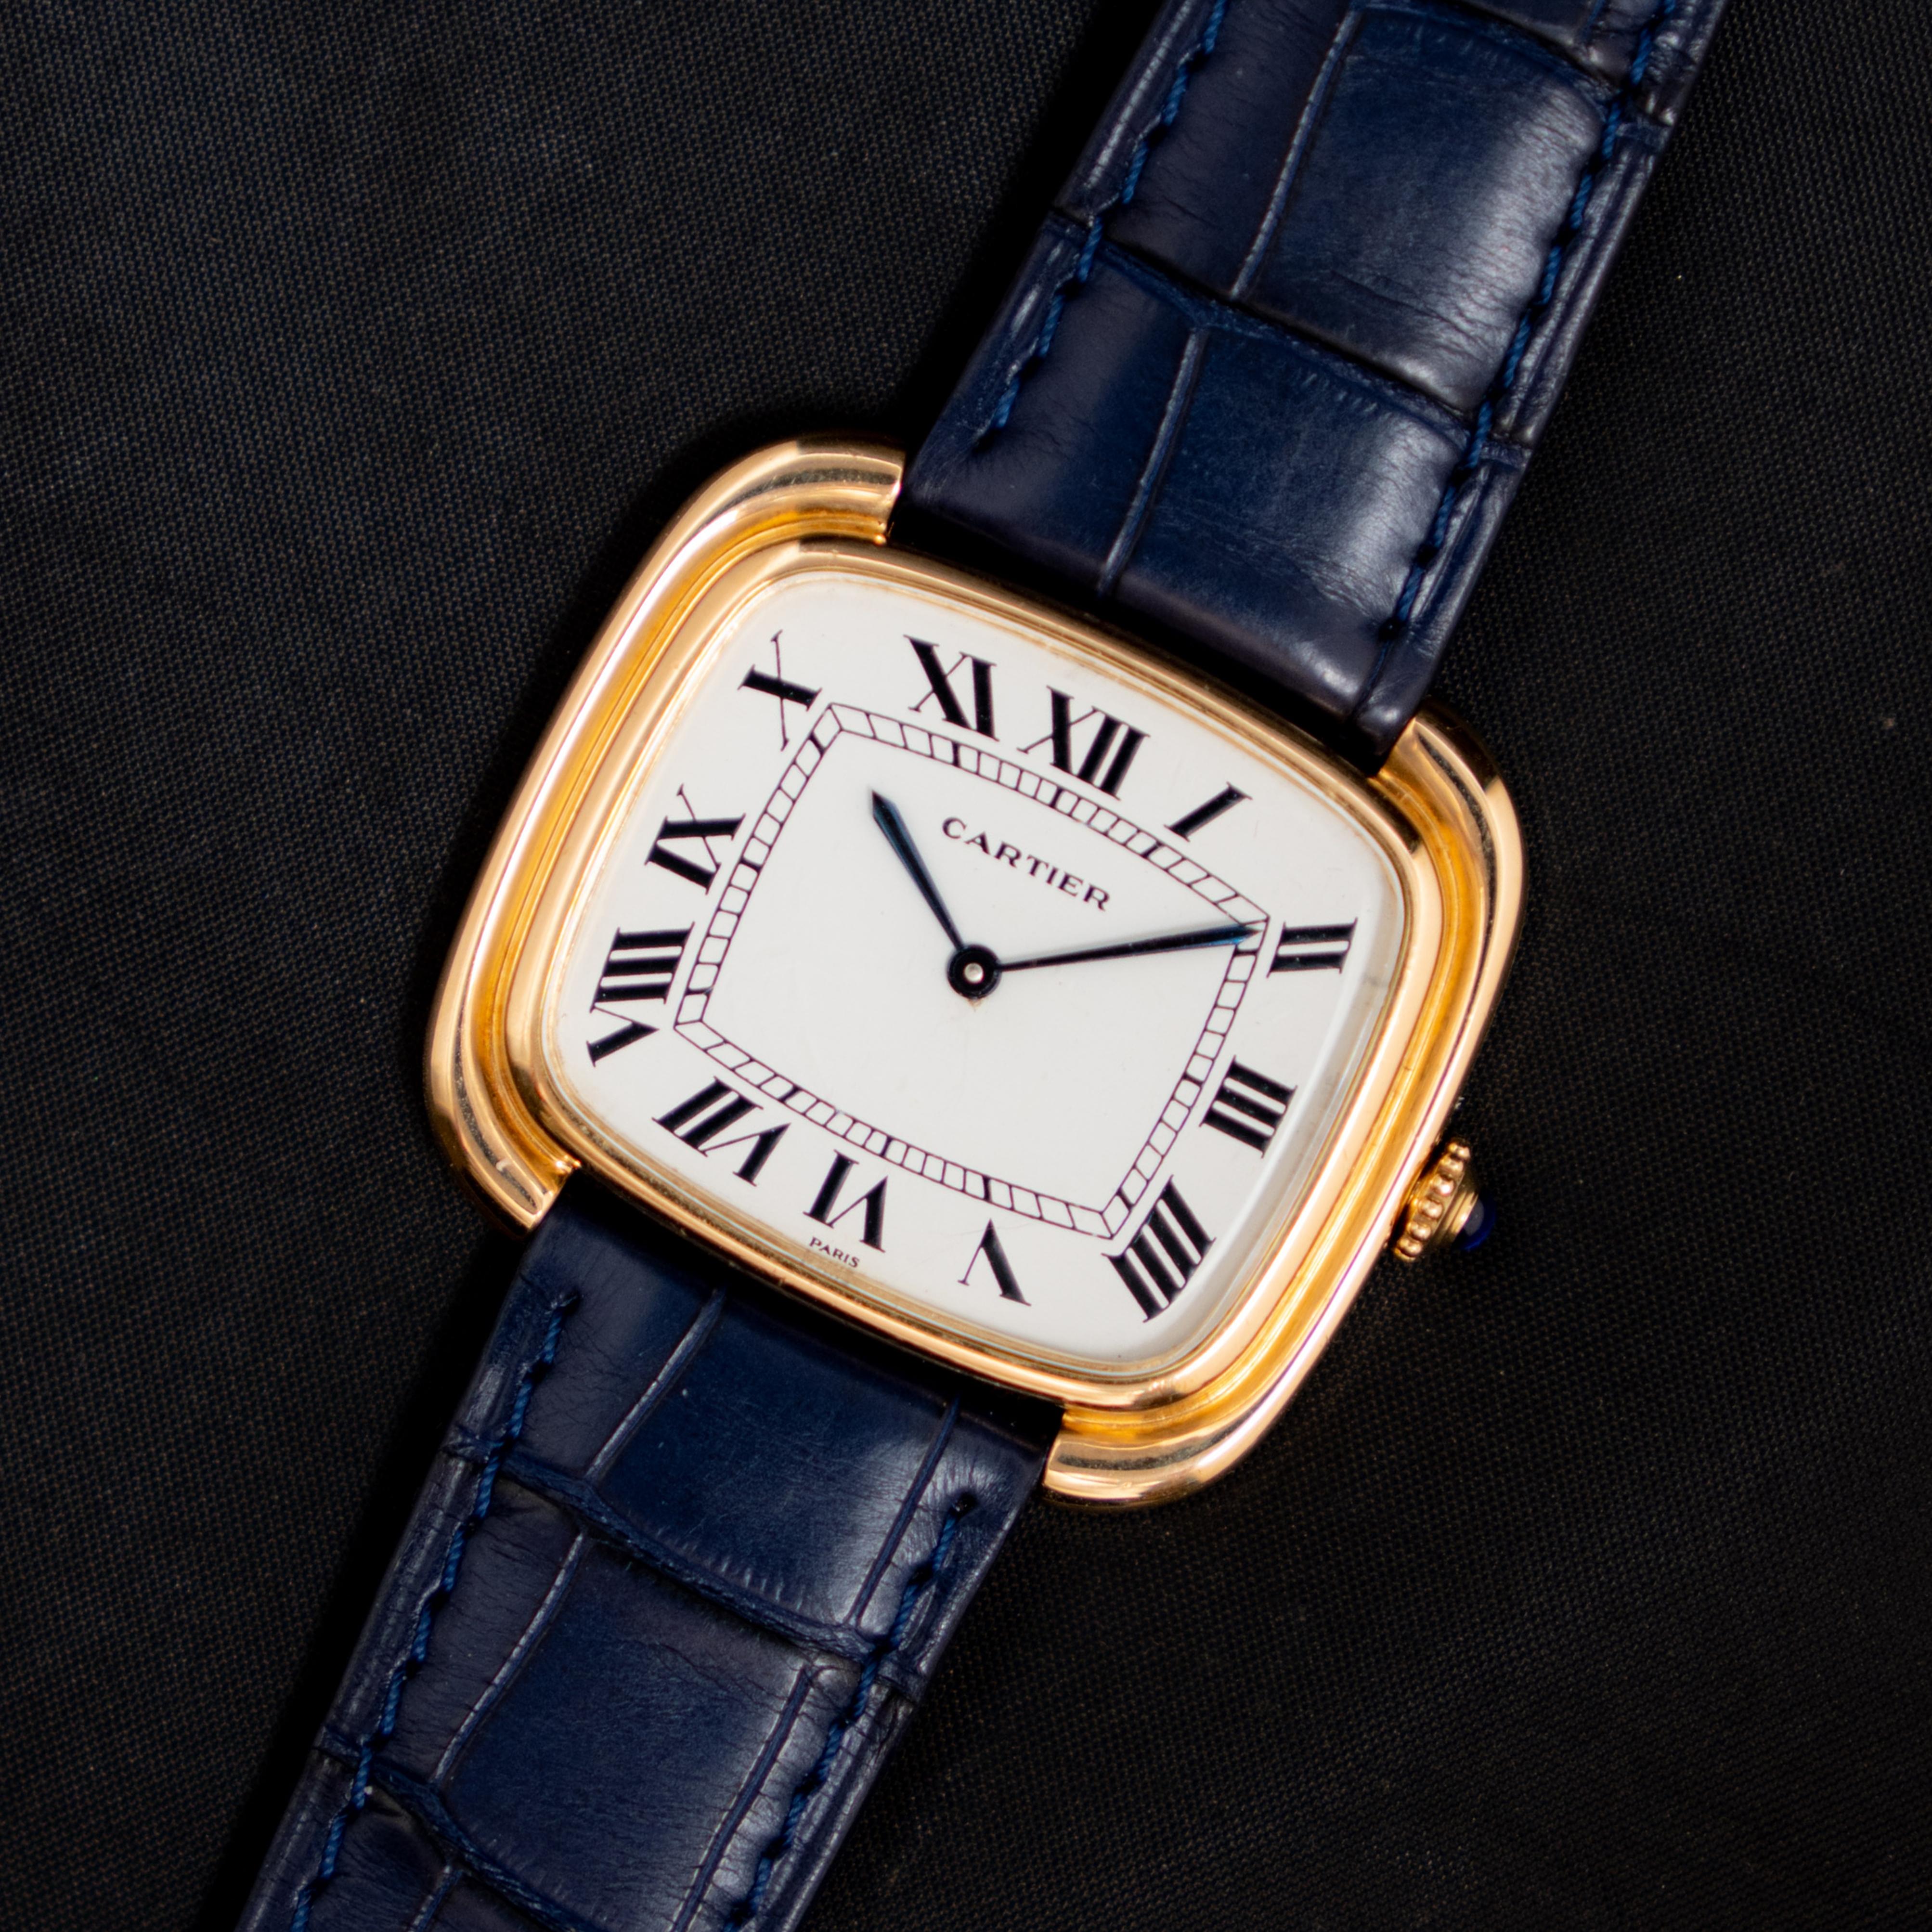 Brand: Cartier
Model: Gondole XL Jumbo
Year: 1970’s
Serial Number: 9705xxxxx
Reference: C03928

In 1972, Cartier introduced the ‘Louis Cartier Collection’ to commemorate its relocation of manufacturing operations from France to Switzerland. This